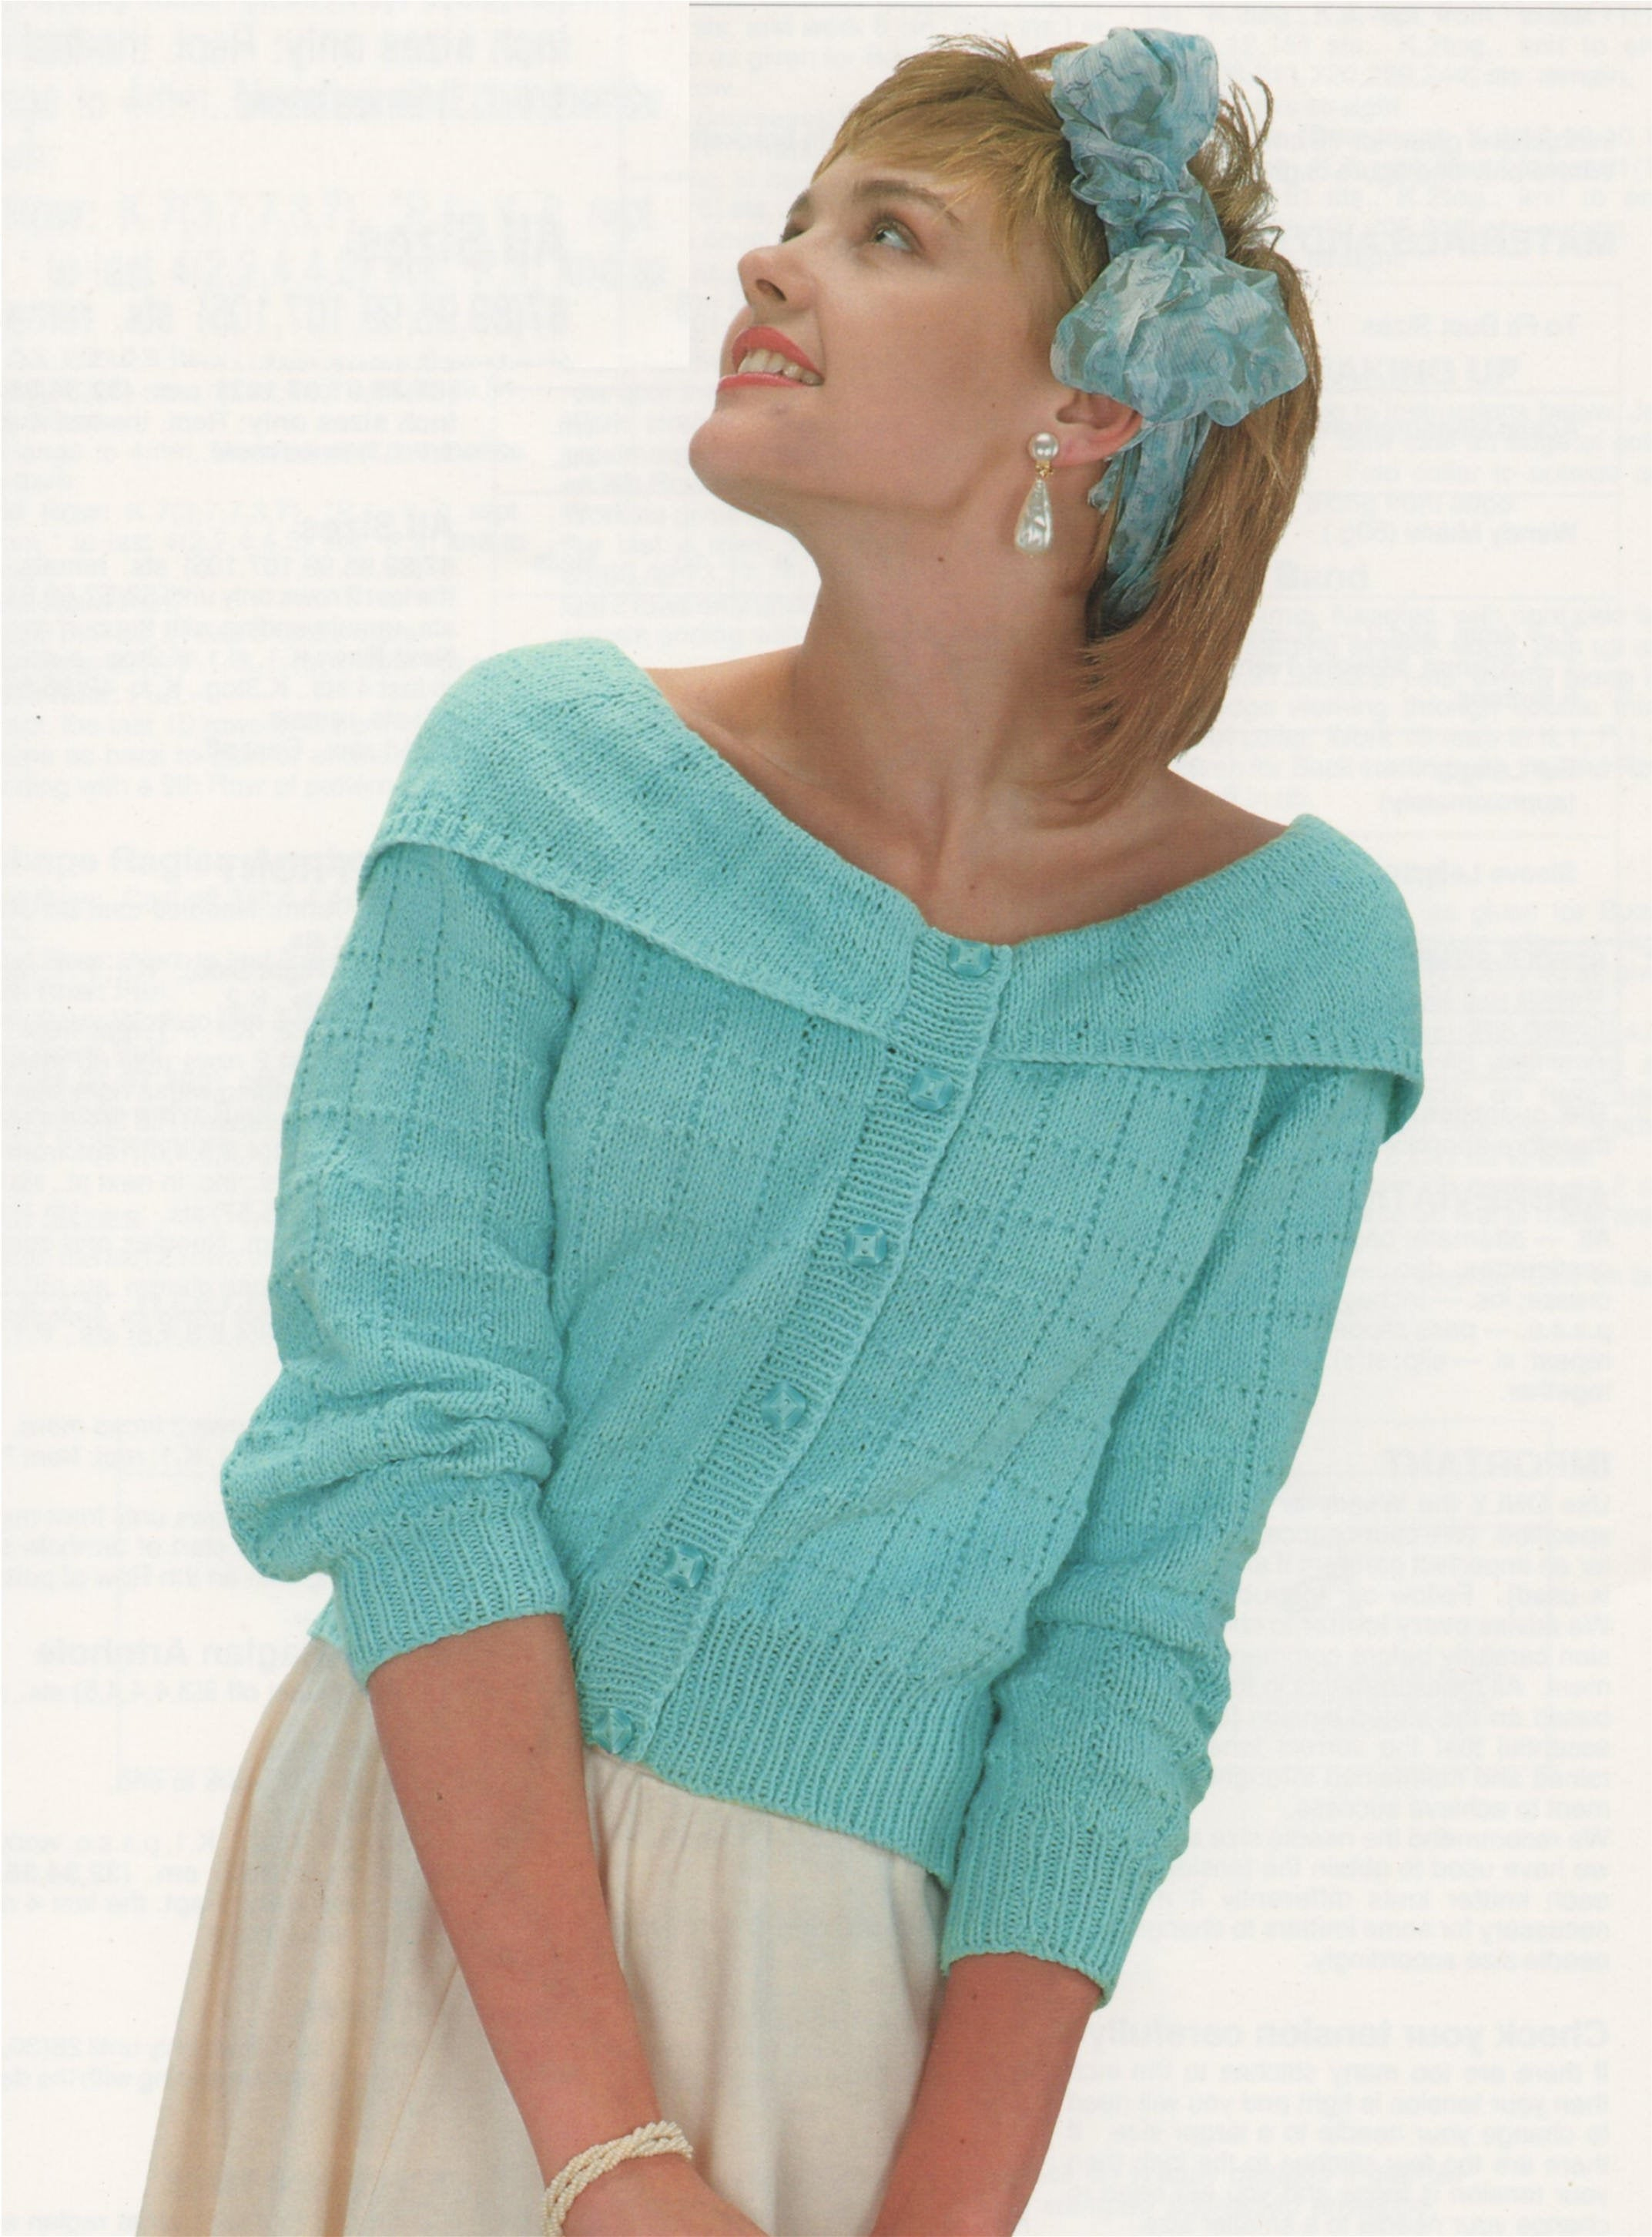 Off The Shoulder Sweater Knitting Pattern Womens Cardigan Knitting Pattern Pdf Ladies 30 32 34 36 38 And